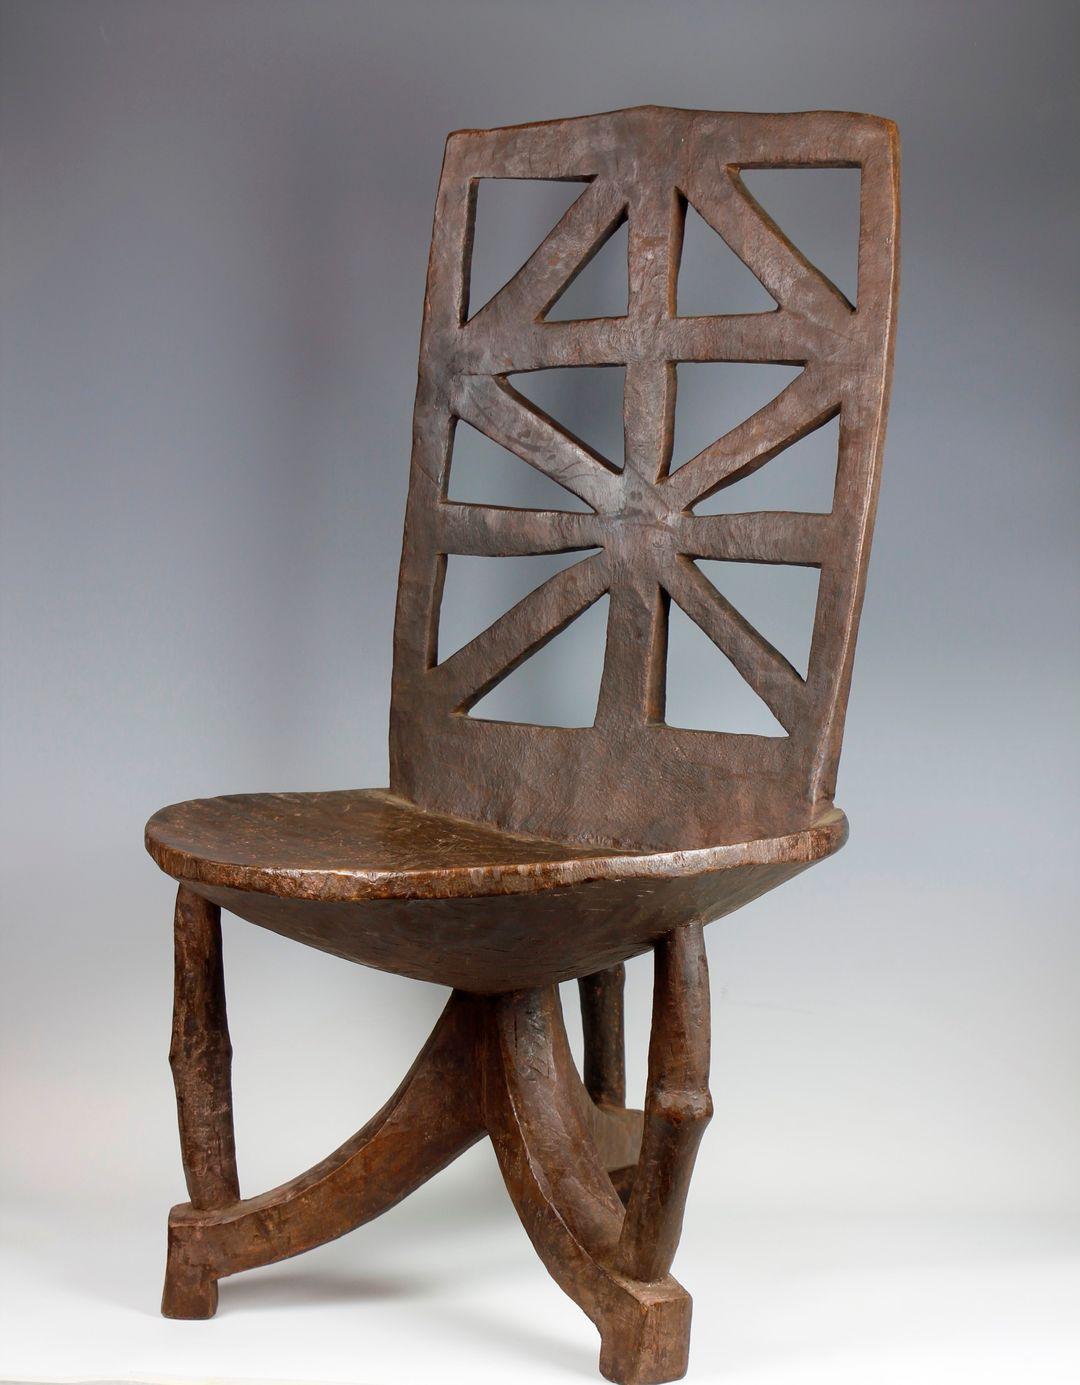 This large, impressive nineteenth-century Ethiopian throne, from the Wollega Oromo culture, features a high, upright back-rest. 

An attractive cut-out cross formation, typically found among chairs from this region of Ethiopia, decorates the back